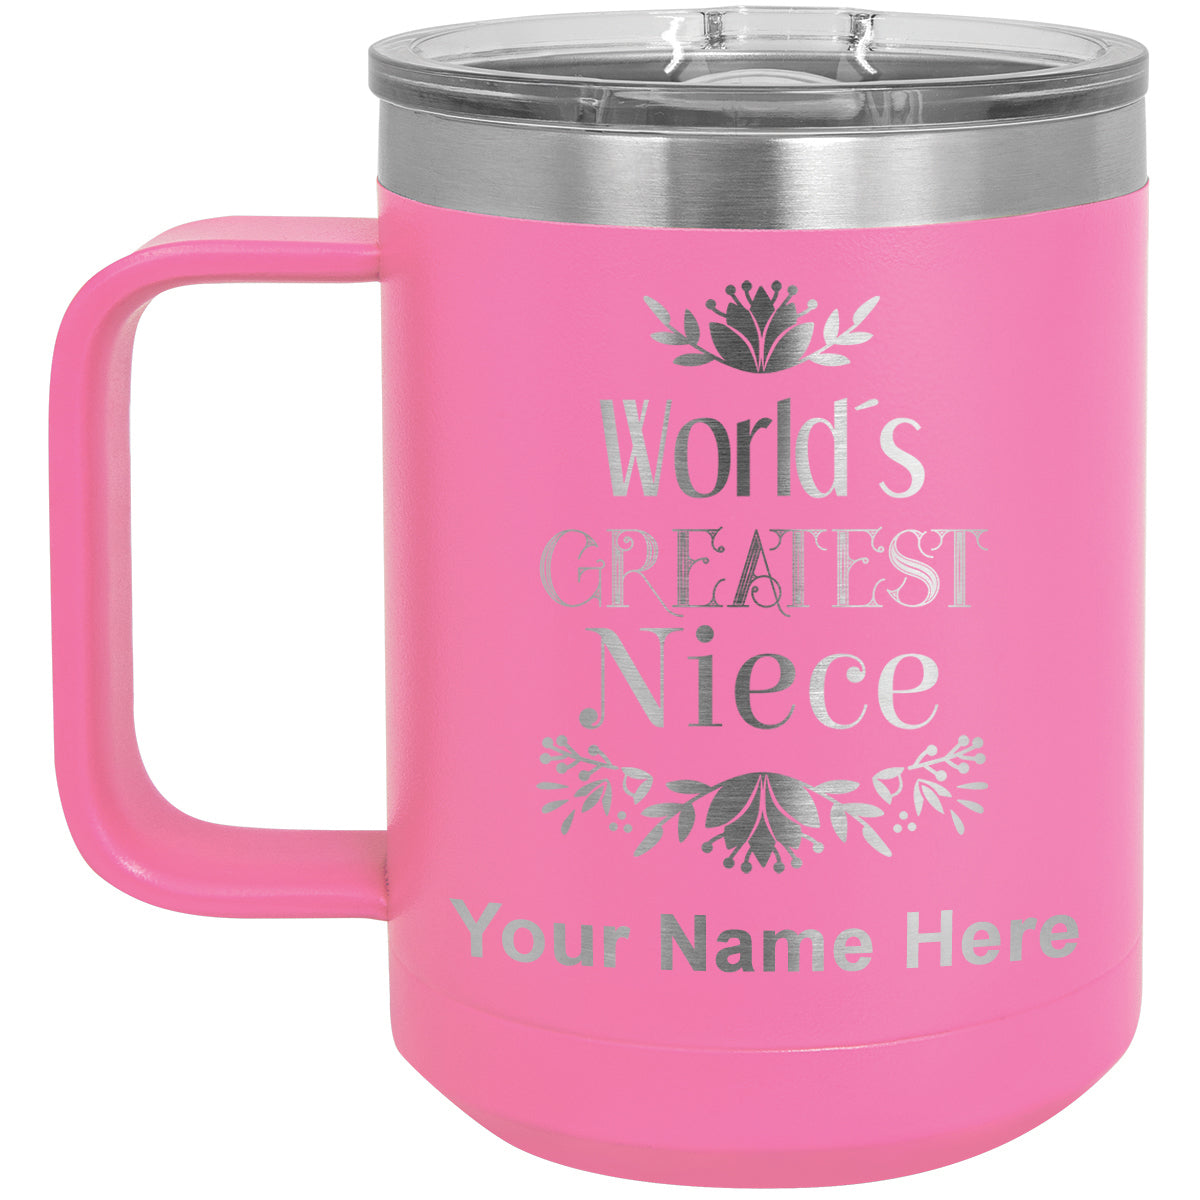 15oz Vacuum Insulated Coffee Mug, World's Greatest Niece, Personalized Engraving Included